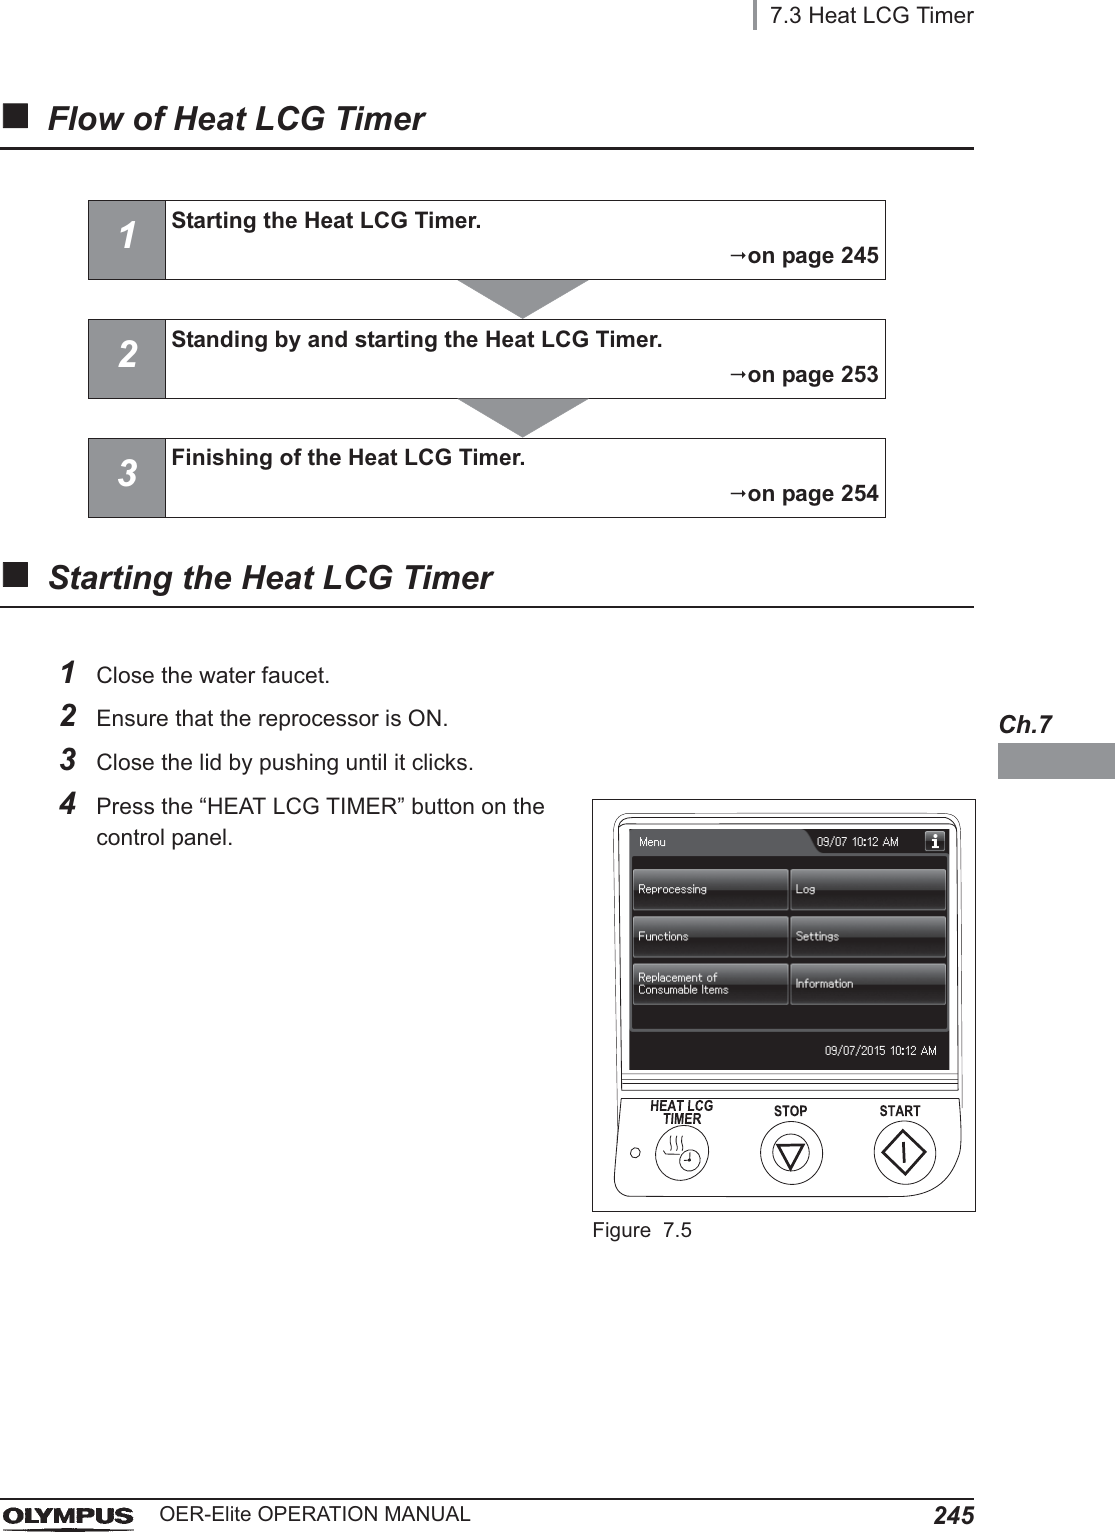 7.3 Heat LCG Timer245OER-Elite OPERATION MANUALCh.7Flow of Heat LCG TimerStarting the Heat LCG Timer1Starting the Heat LCG Timer.on page 2452Standing by and starting the Heat LCG Timer.on page 2533Finishing of the Heat LCG Timer.on page 2541Close the water faucet.2Ensure that the reprocessor is ON.3Close the lid by pushing until it clicks.4Press the “HEAT LCG TIMER” button on the control panel.Figure 7.5